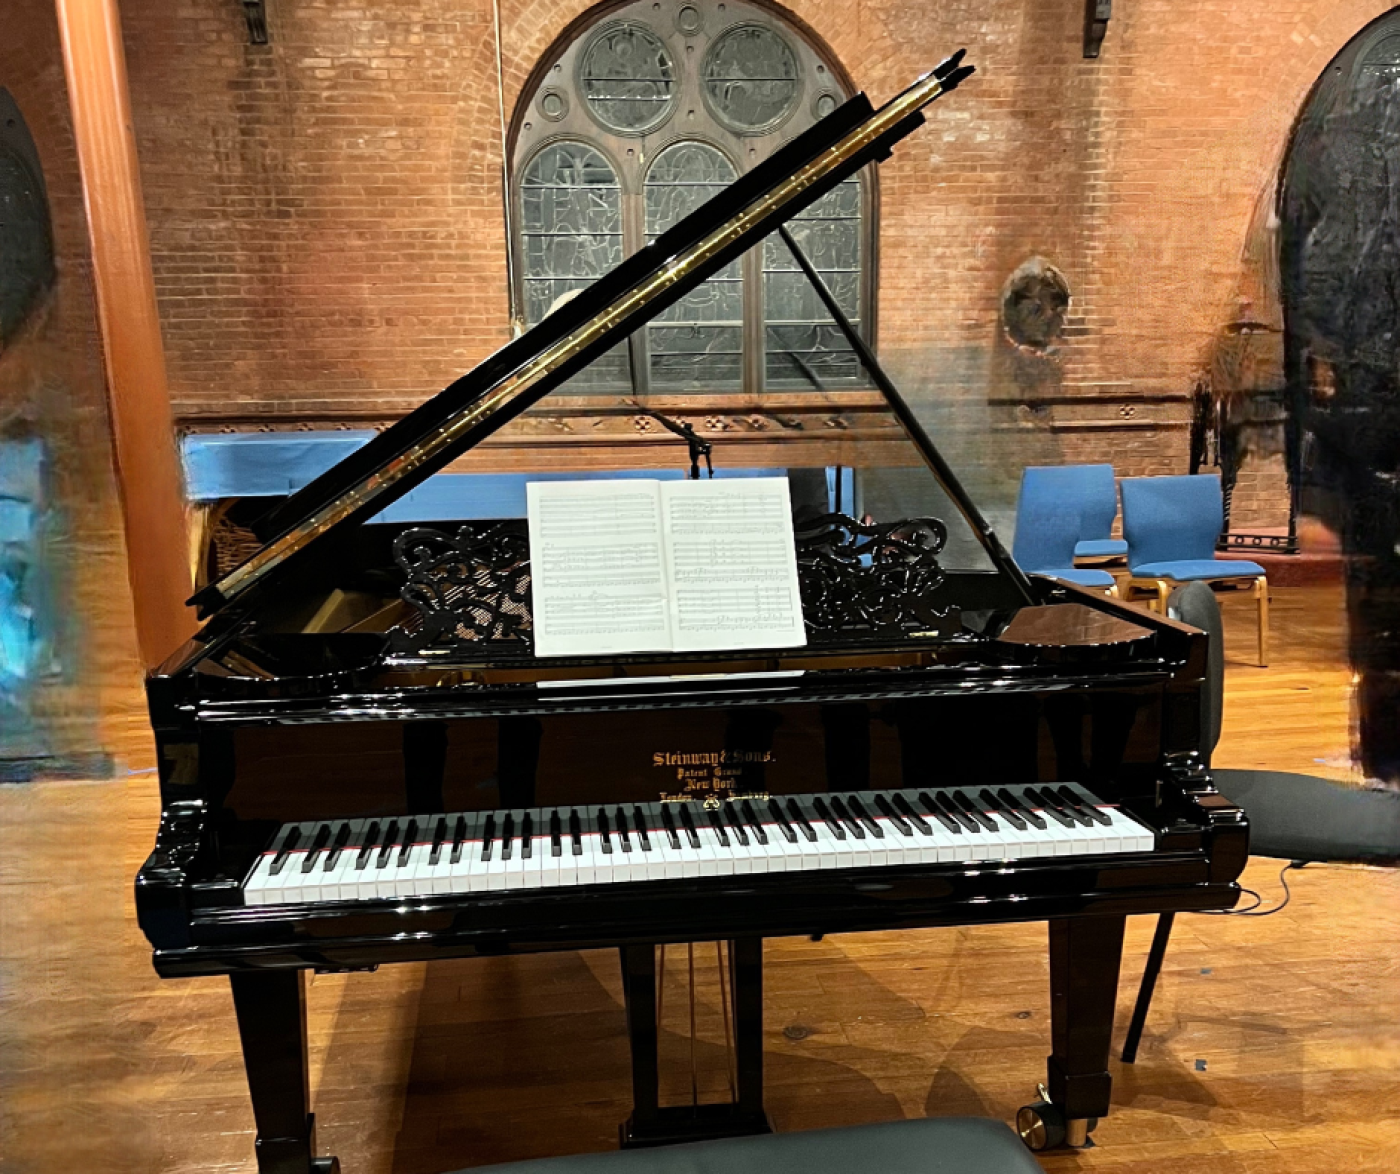 Refurbished Steinway recently acquired by Chiarina